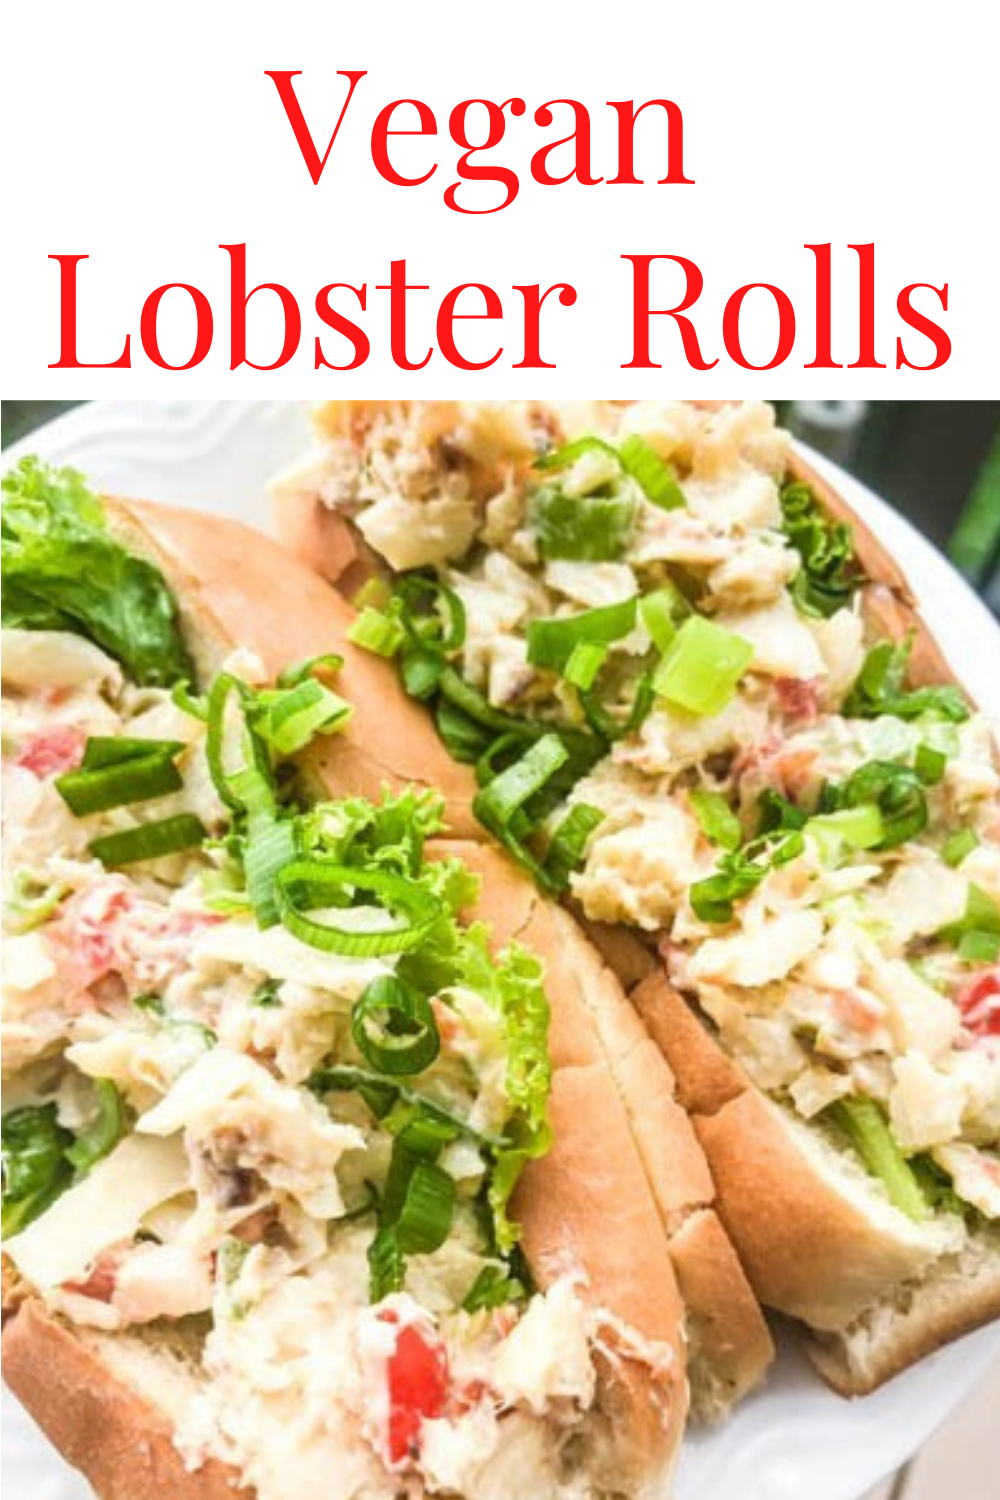 Hearts of Palm Lobster-Style Rolls - Super easy to make and bursting with all the flavor of a traditional lobster roll!

#lobsterrollrecipe #veganlobsterroll #thiswifecooksrecipes #meatless #plantbased #vegansandwichrecipes via @thiswifecooks